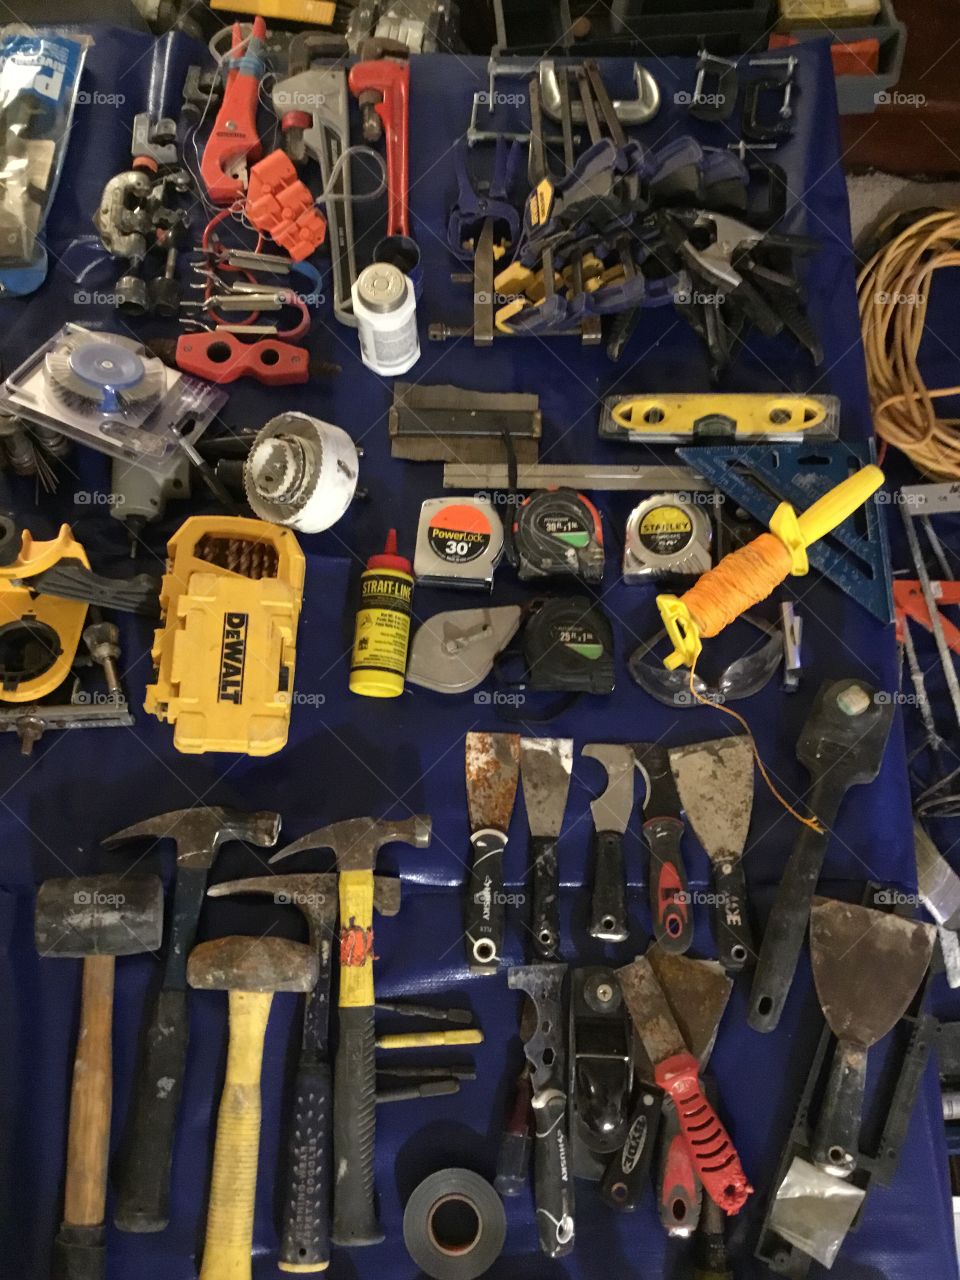 Some tools